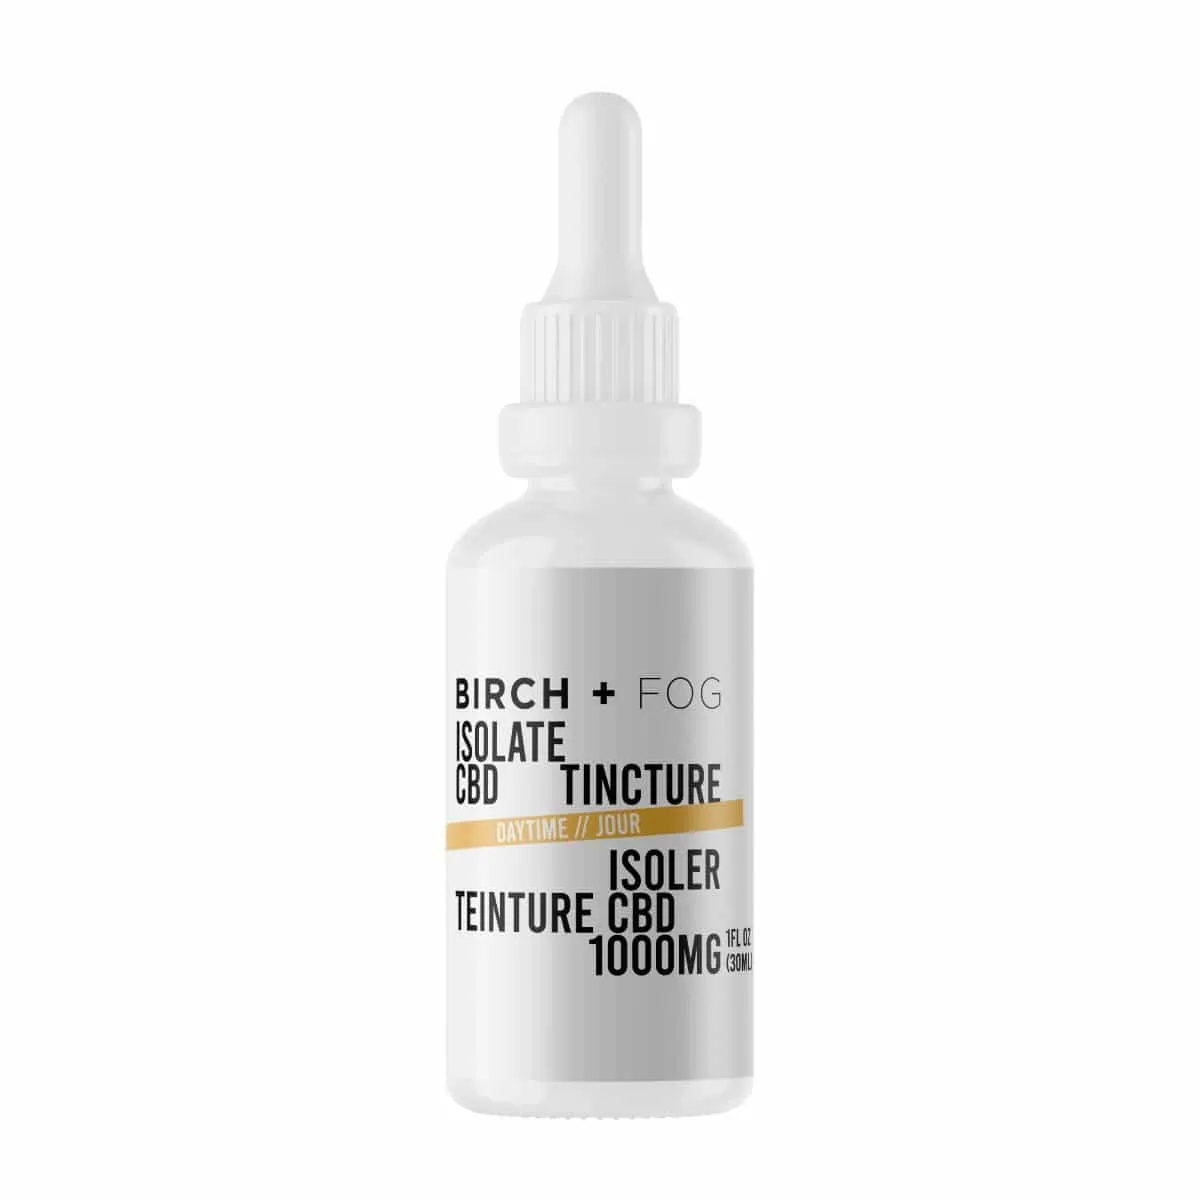 Birch + Fog 1000mg Isolate CBD Tincture for Daytime Use.